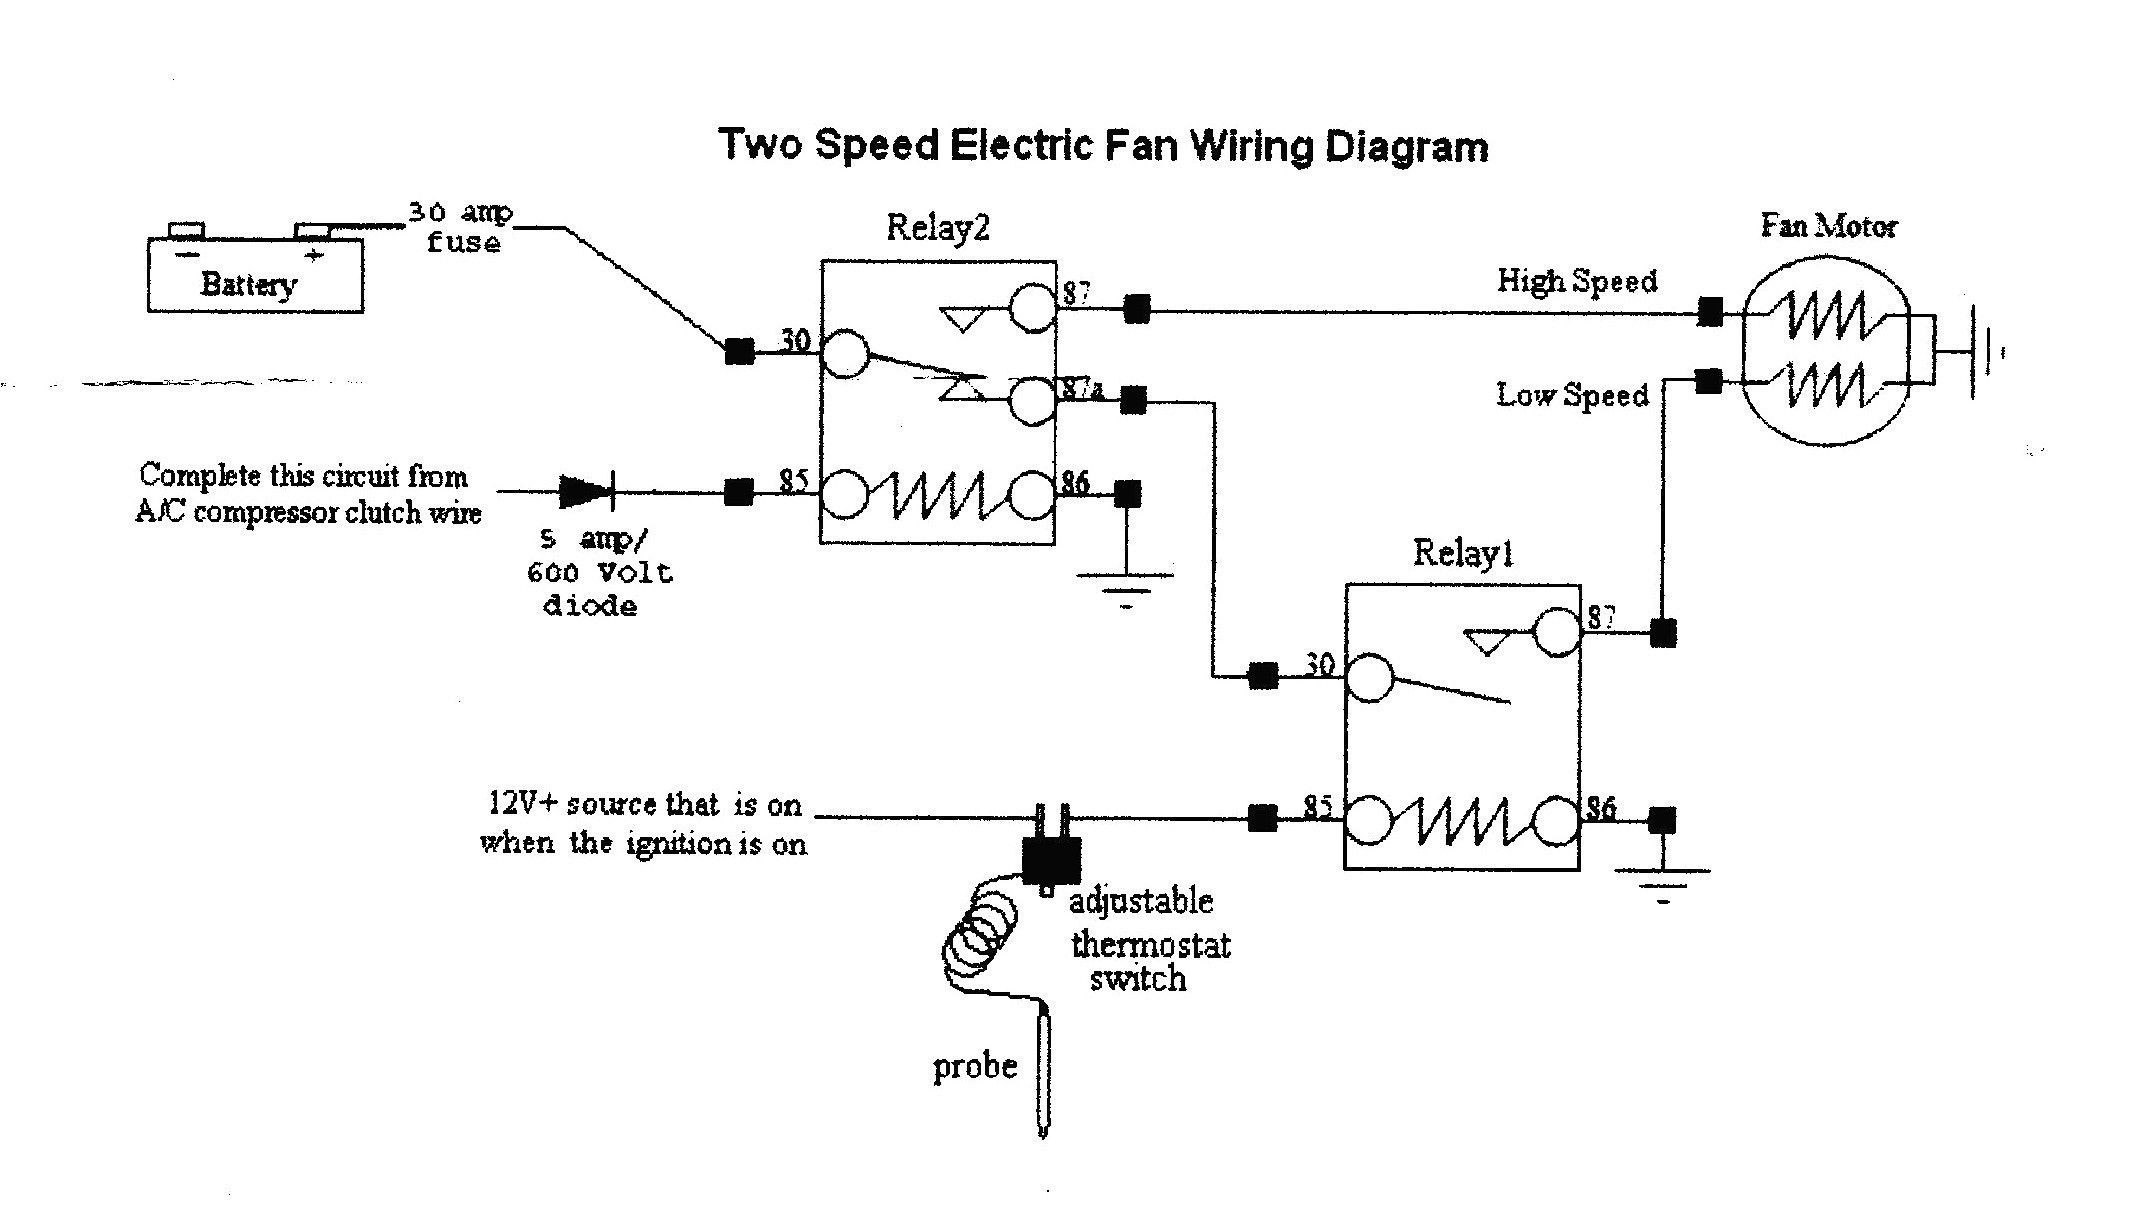 Bmw Fan Relay Fan thermo Switch Part Numbers 1802 Unique Wiring Diagram for Electric Fan Relay Diagram